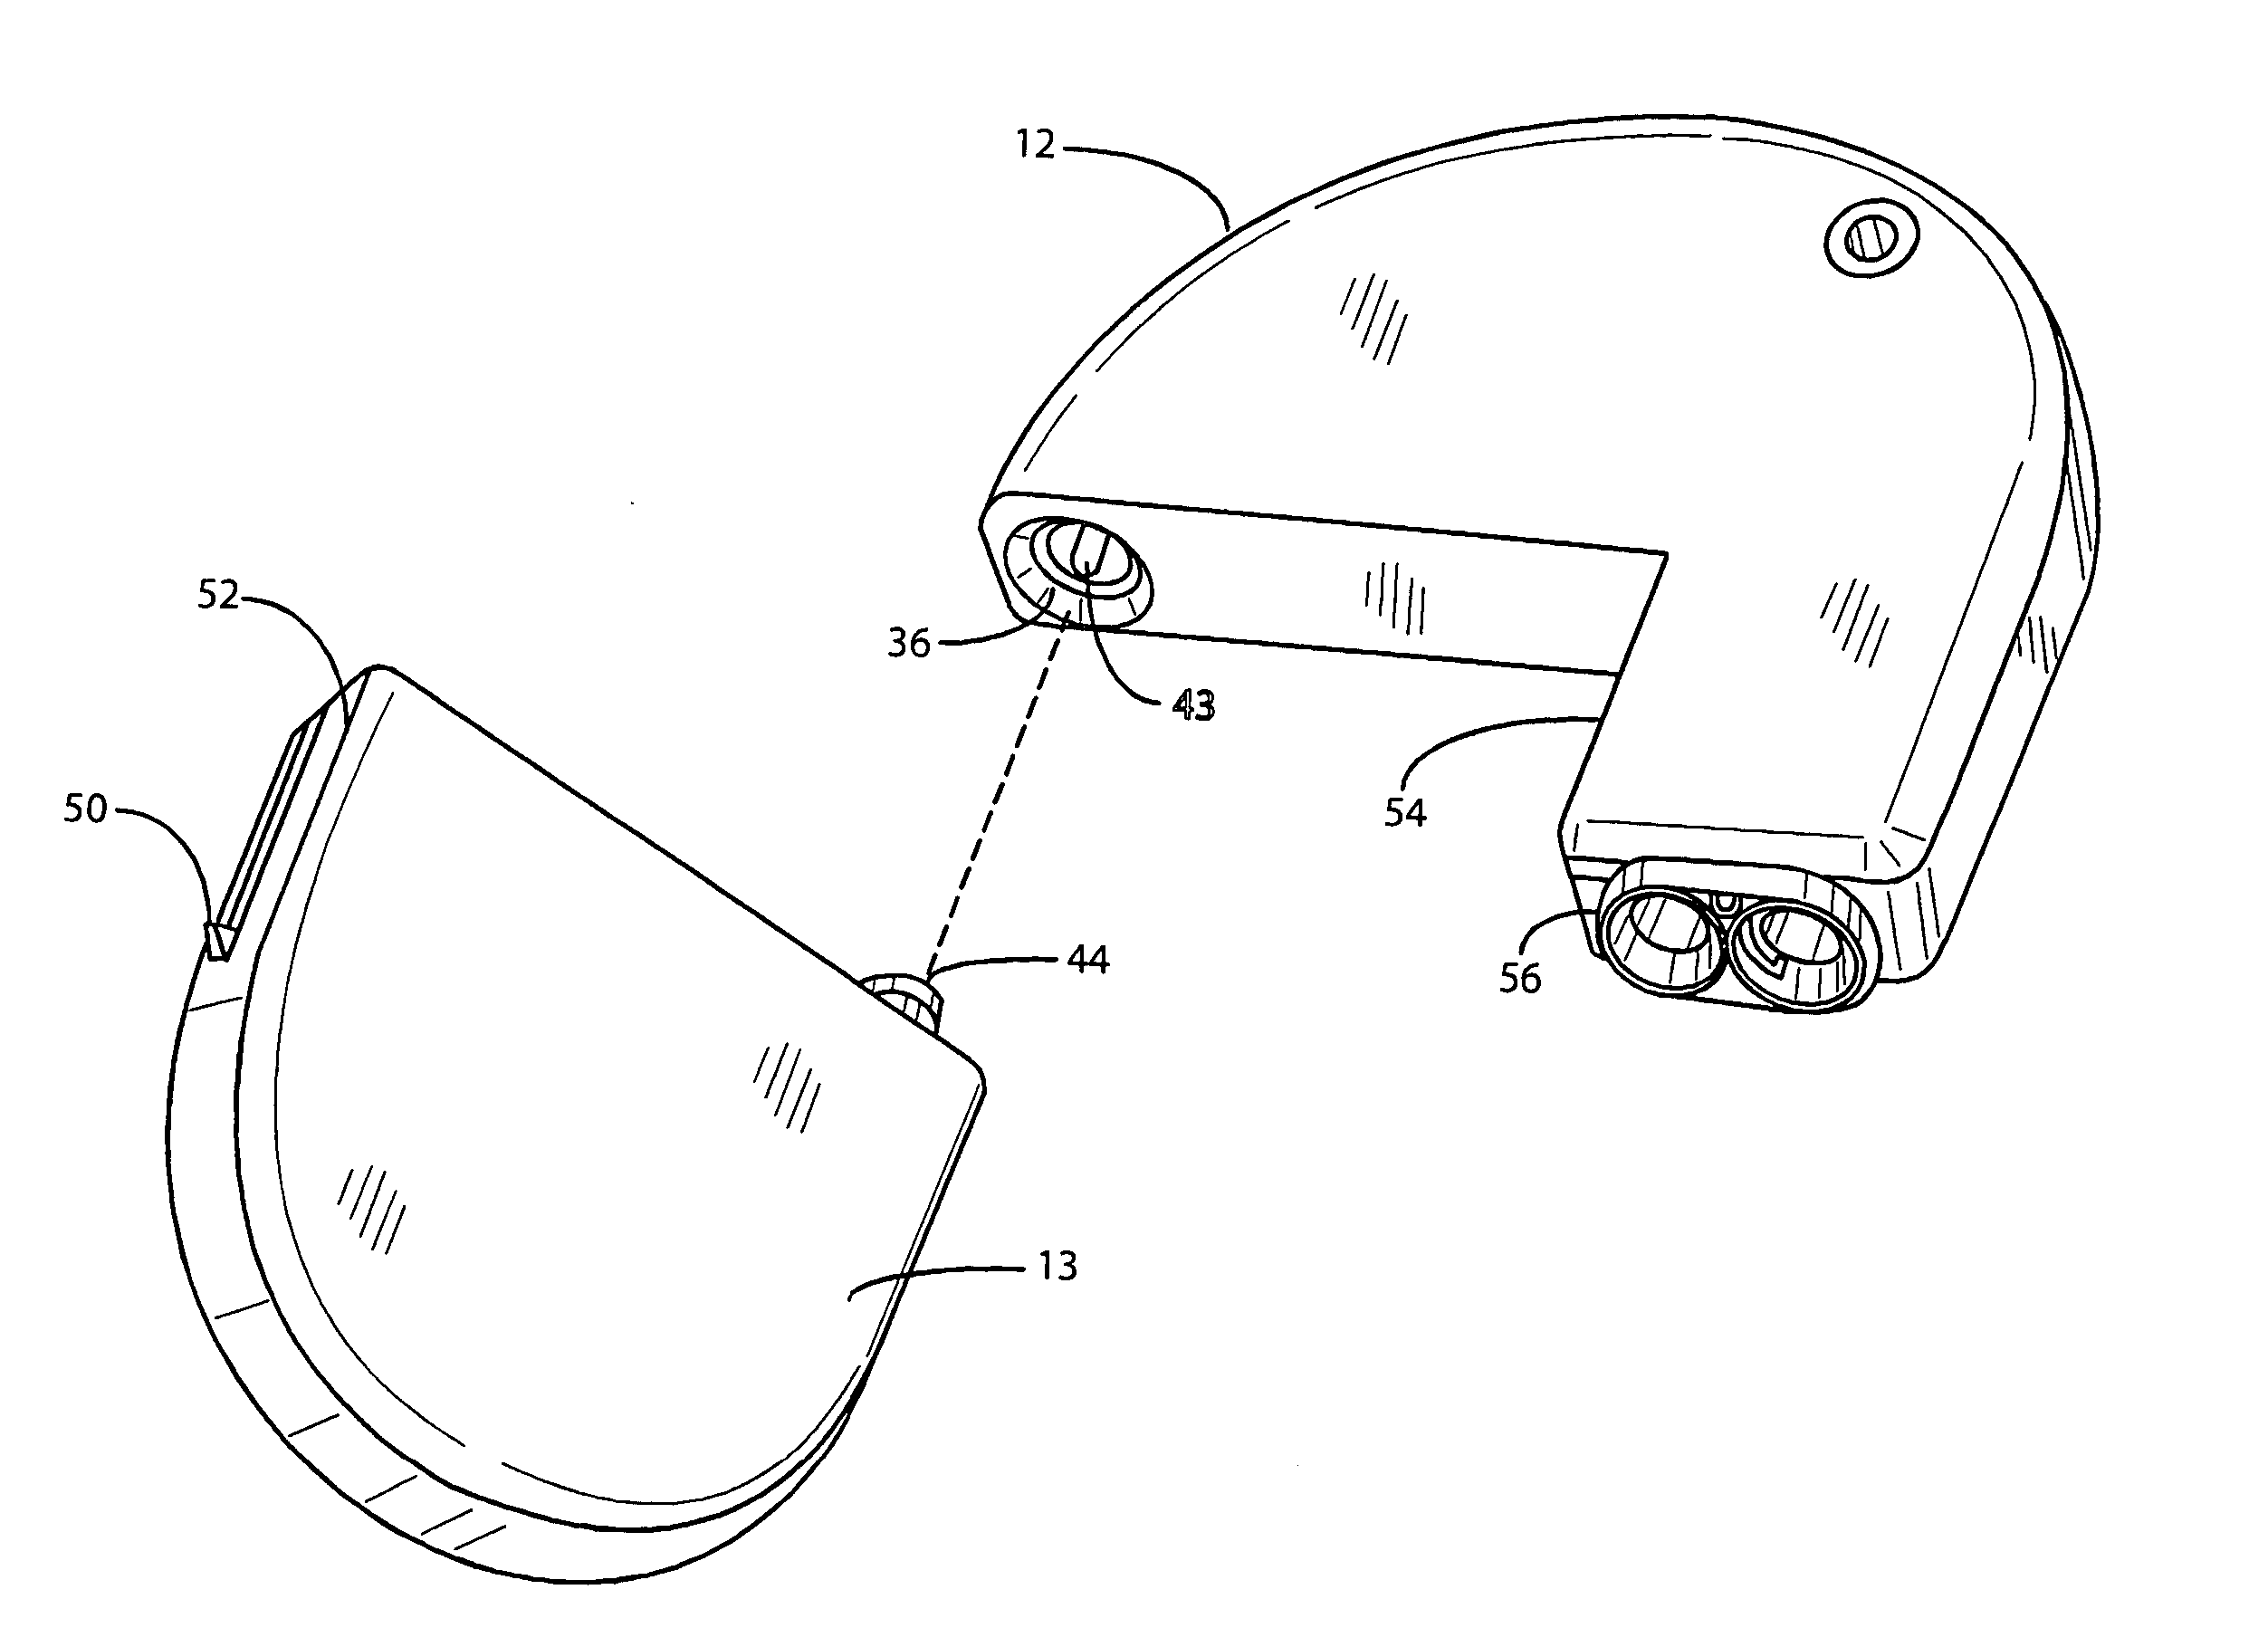 Implantable medical device with detachable battery compartment